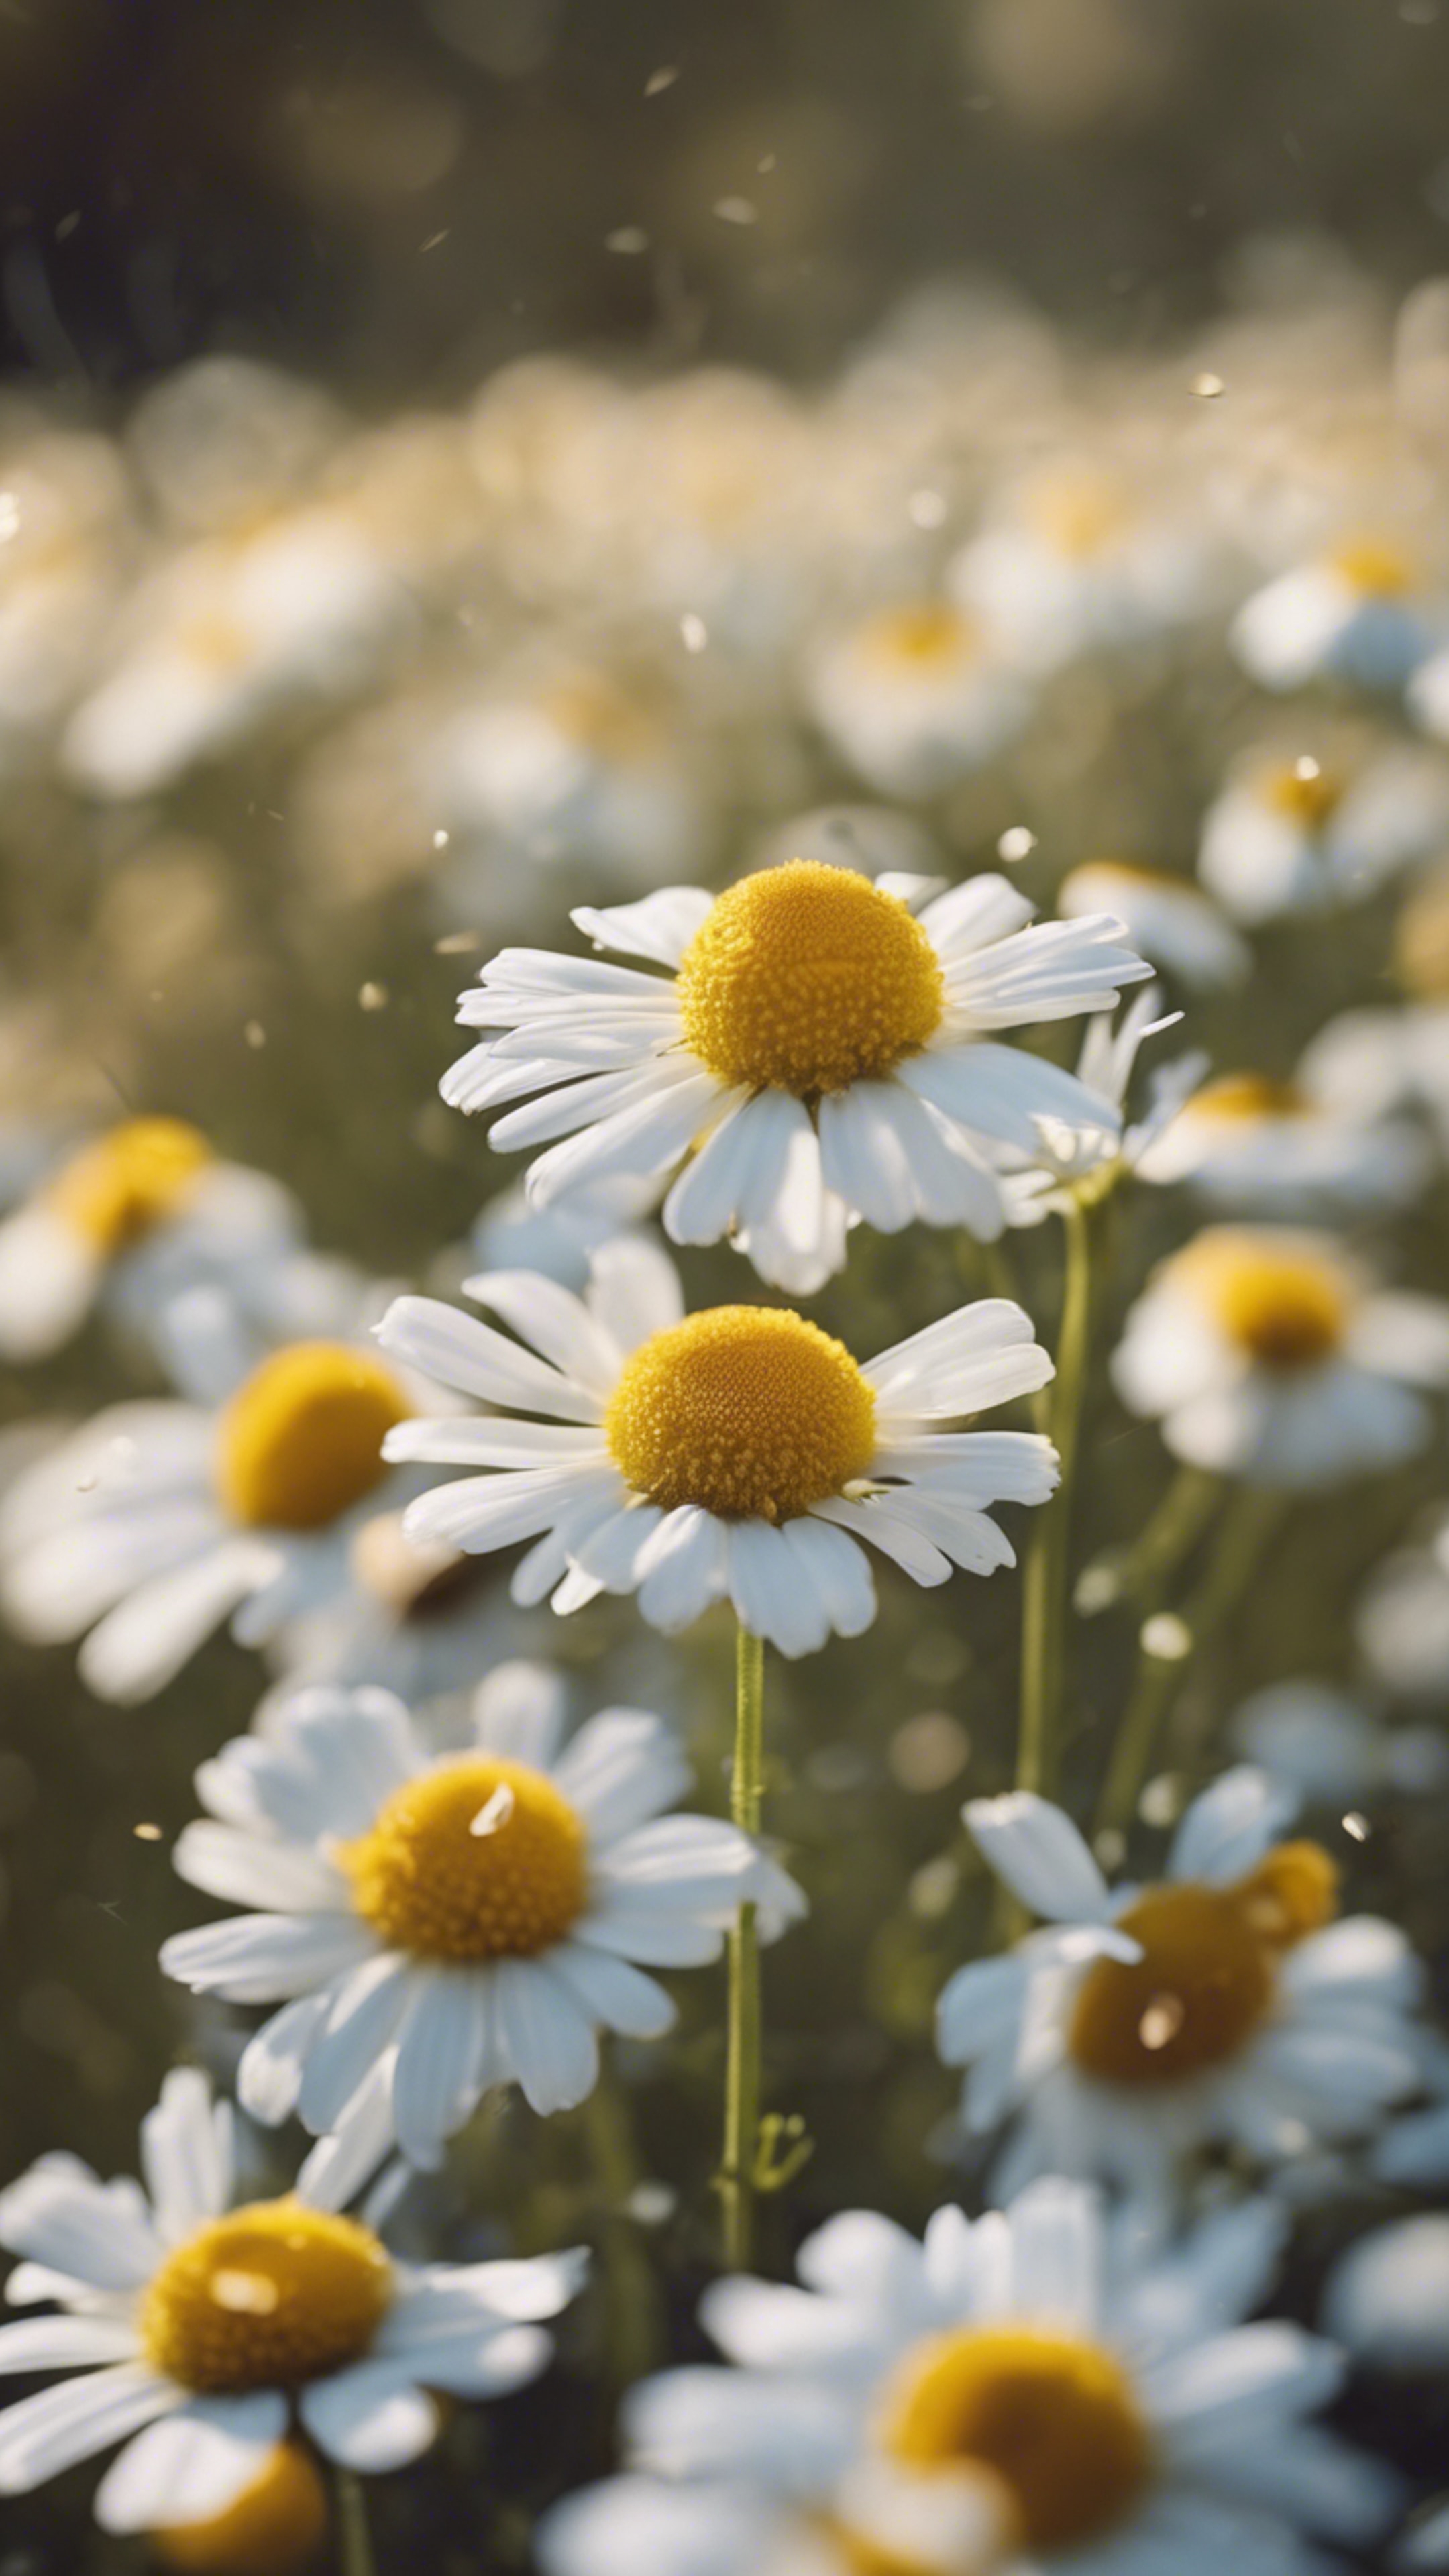 A dense field of chamomile flowers bathed in soft morning sunlight. Hintergrund[24173eec96654bd5b545]